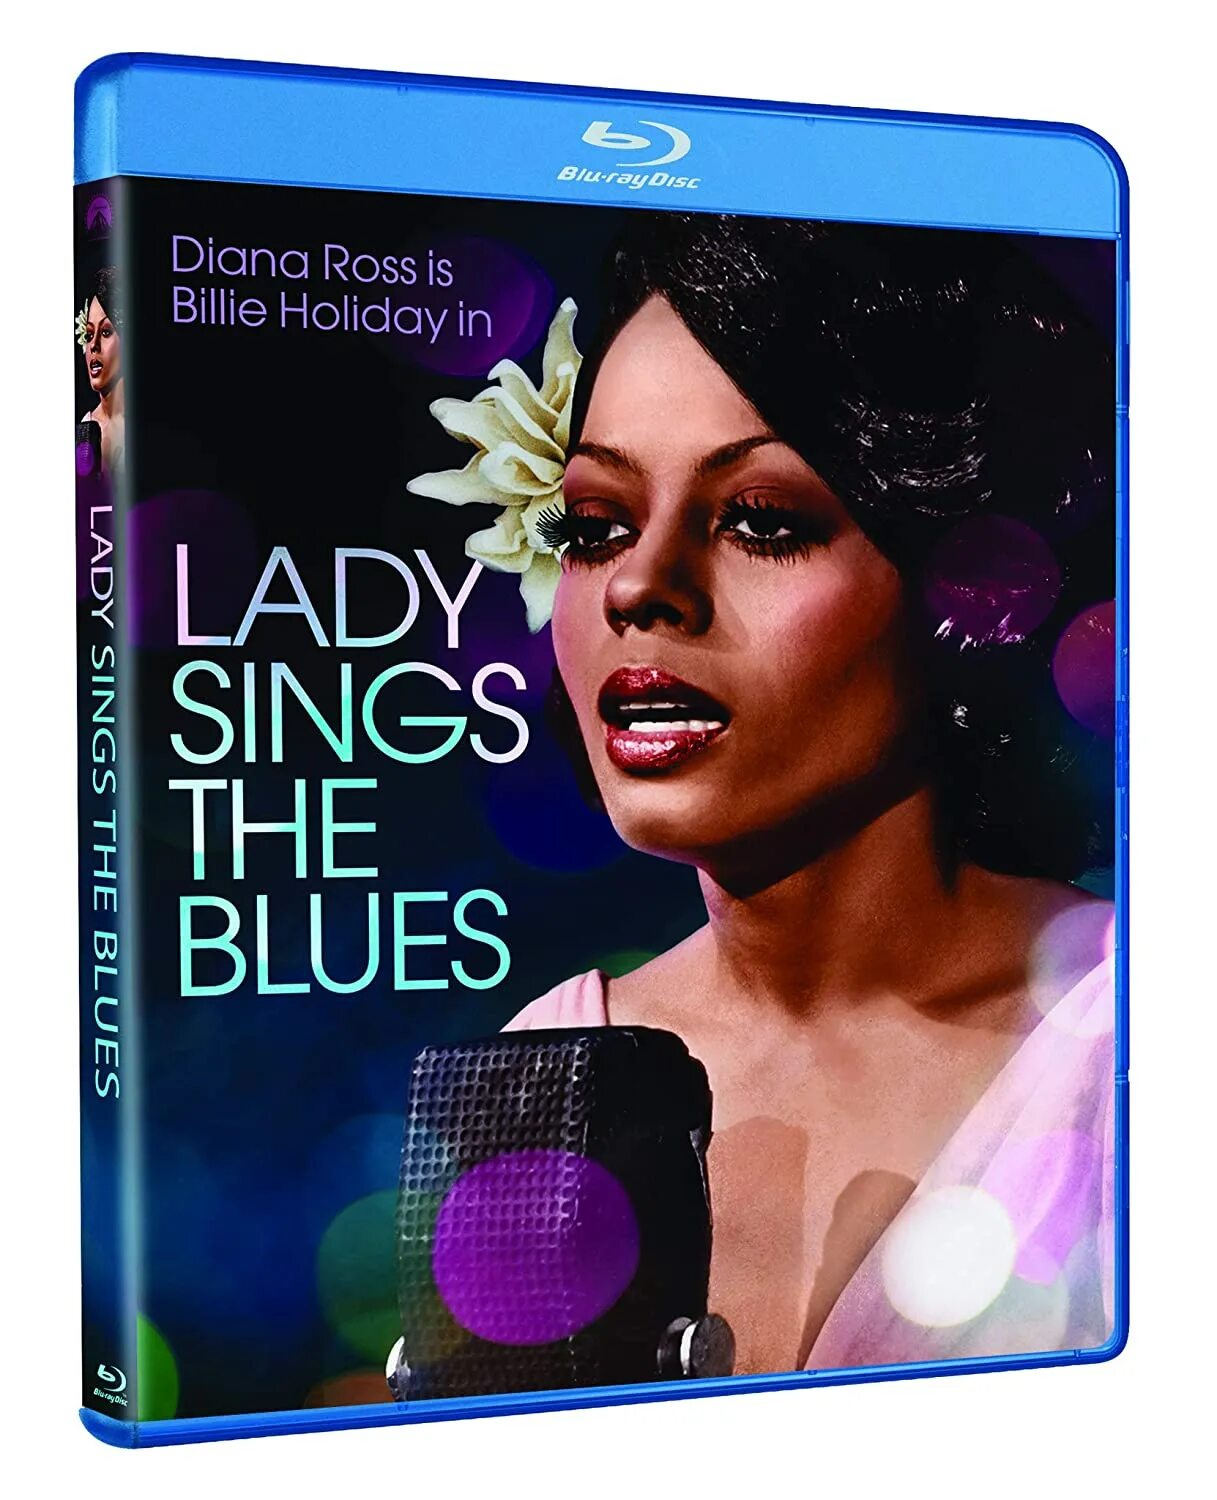 Sings the blues. Lady Sings the Blues 1972. Diana Ross. Billie Holiday Lady Sings the Blues.